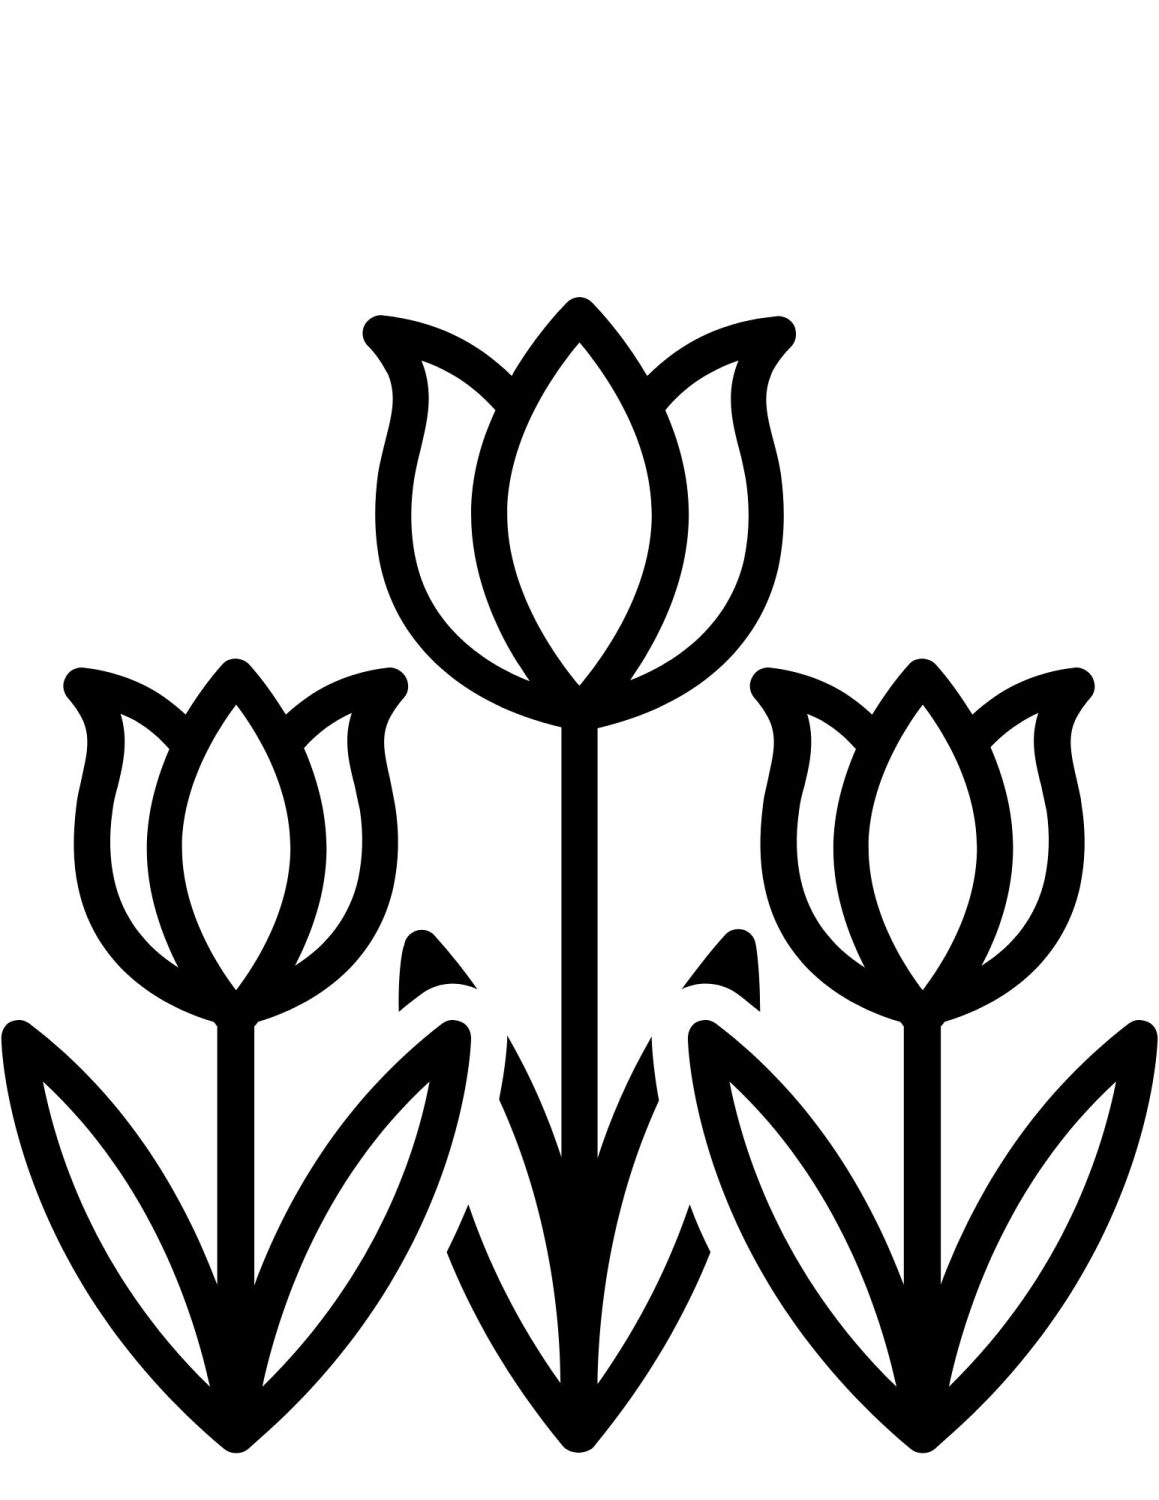 Three simple tulips to color for kids.